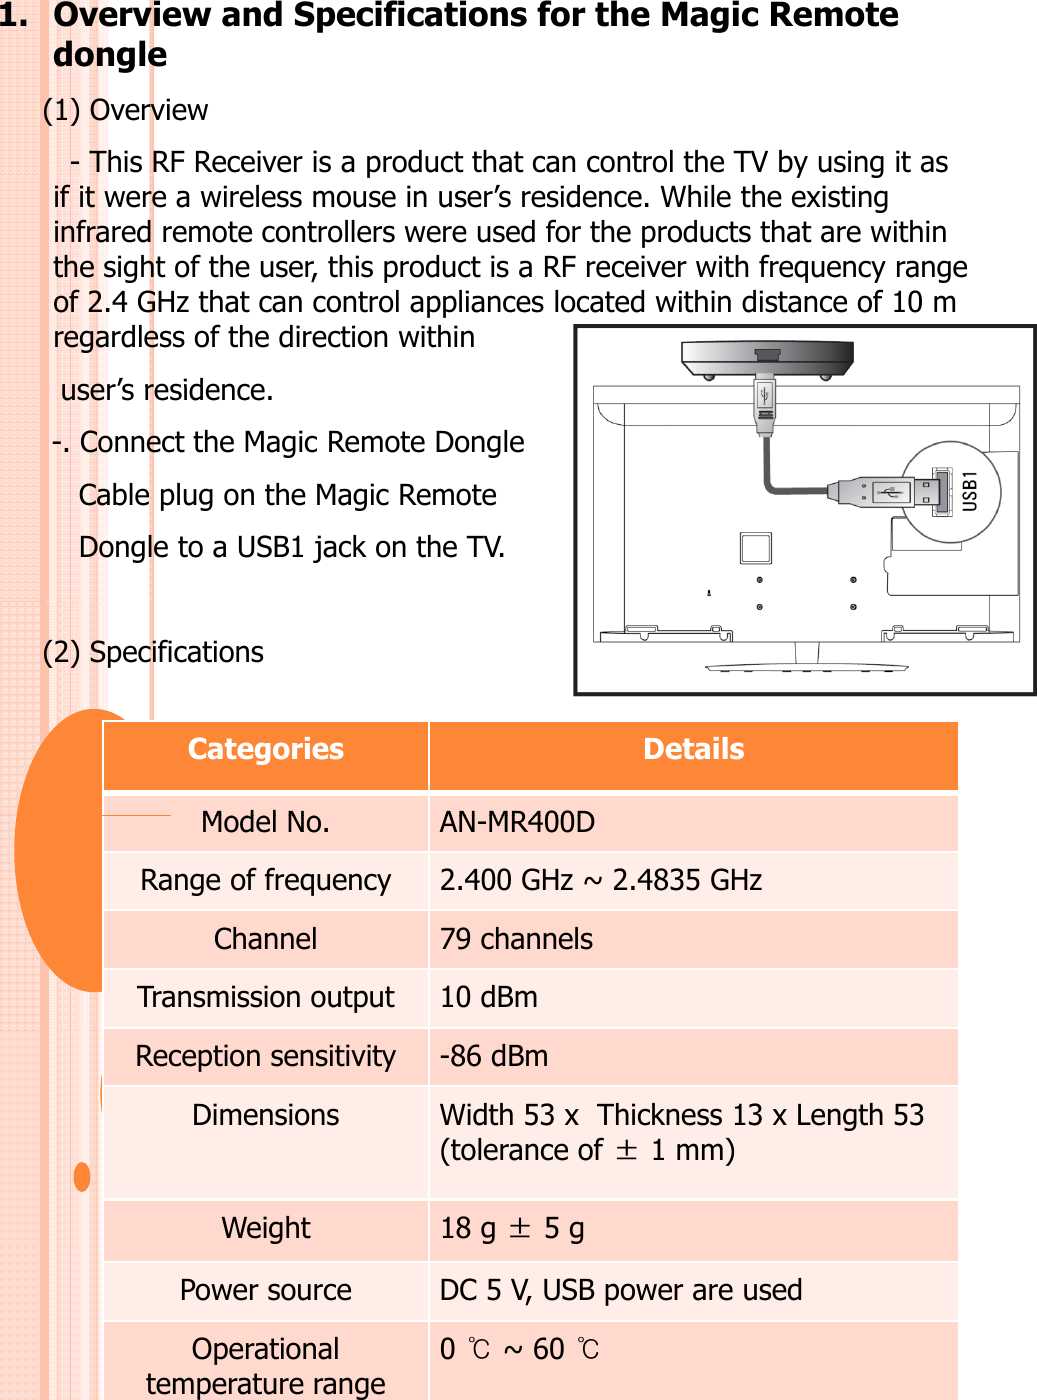 1. Overview and Specifications for the Magic Remote dongle(1) Overview-This RF Receiver is a product that can control the TV by using it as ssapoduaaoobyusgasif it were a wireless mouse in user’s residence. While the existing  infrared remote controllers were used for the products that are within the sight of the user, this product is a RF receiver with frequency range of 2.4 GHz that can control appliances located within distance of 10 m regardless of the direction within user’s residenceuser s residence. -. Connect the Magic Remote Dongle Cable plug on the Magic Remote Dongle to a USB1 jack on the TV.(2) SpecificationsCategories DetailsModel NoANMR400DModel No.AN-MR400DRange of frequency 2.400 GHz ~ 2.4835 GHzChannel 79 channelsTransmission output 10 dBmReception sensitivity -86 dBmDimensions Width 53 x Thickness 13 x Length 53 (tolerance of ±1 mm) Weight 18 g ±5 g ggPower source DC 5 V, USB power are usedOperational temperature range 0 ~ 60 